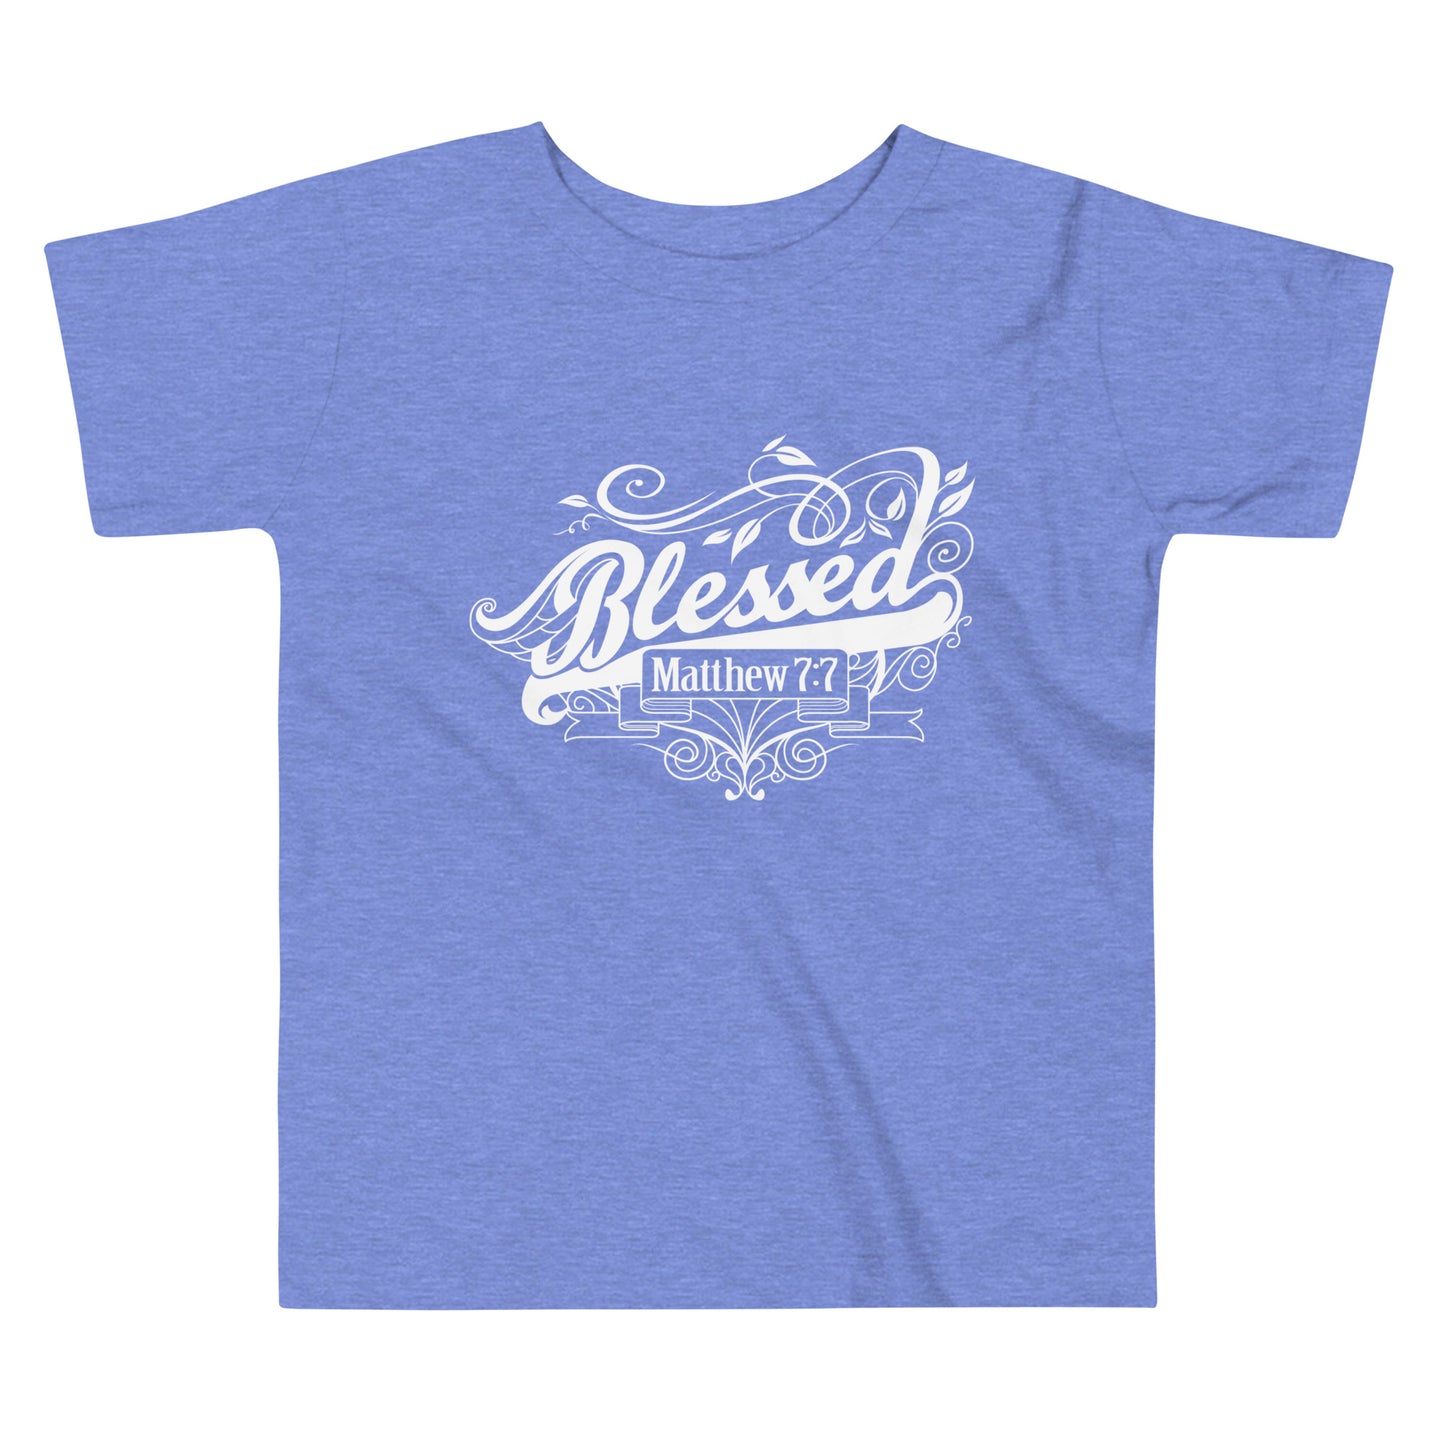 Blessed - Toddler Short Sleeve Tee - View All Colors